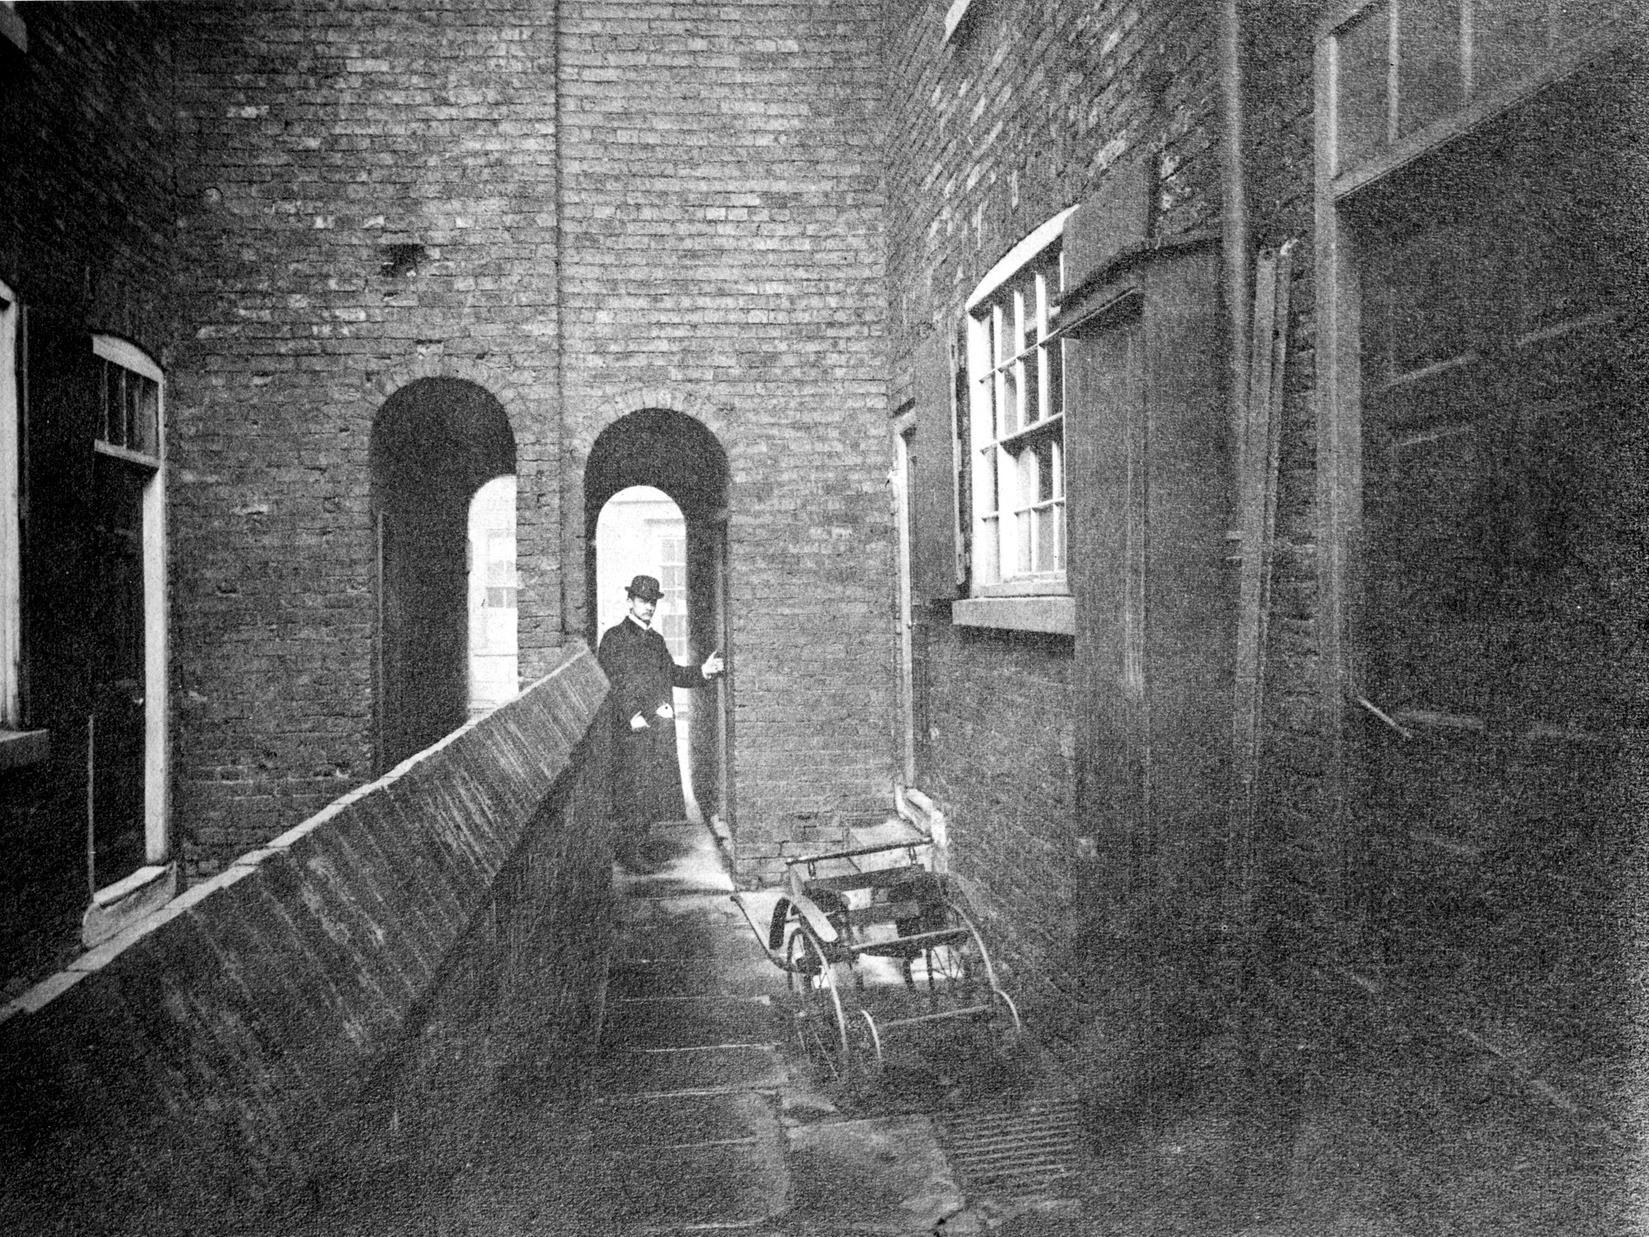 A view of Dawson's Court, which leads off George Street. It shows a narrow alleyway with a man in smart attire standing in entrance.